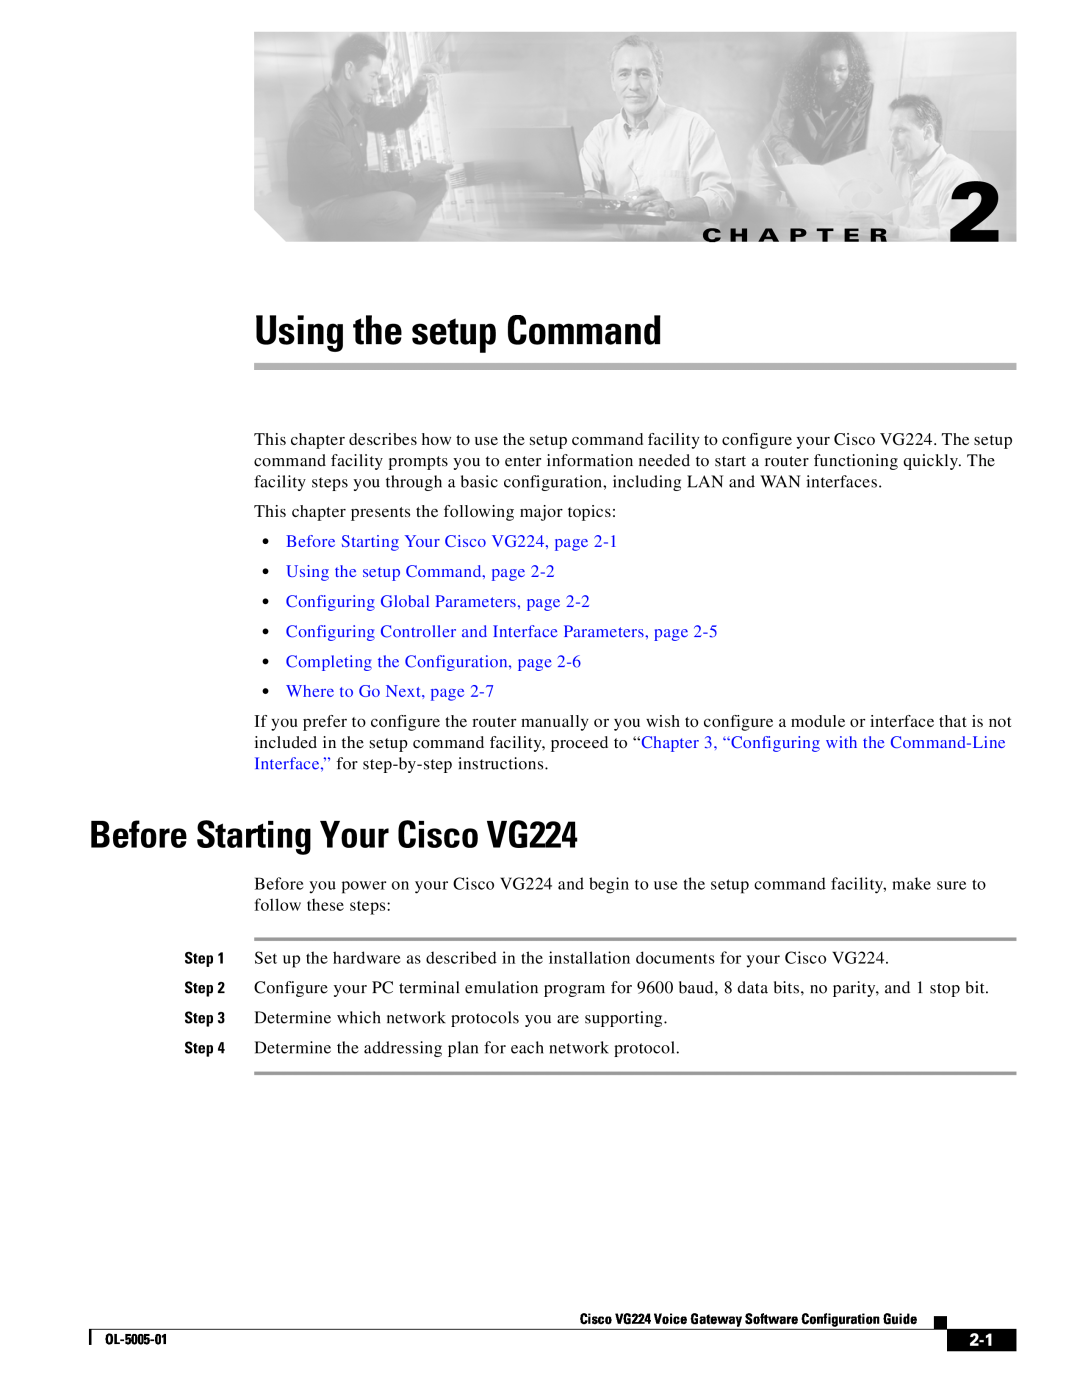 Cisco Systems manual Using the setup Command, Before Starting Your Cisco VG224, Configuring Global Parameters, page 